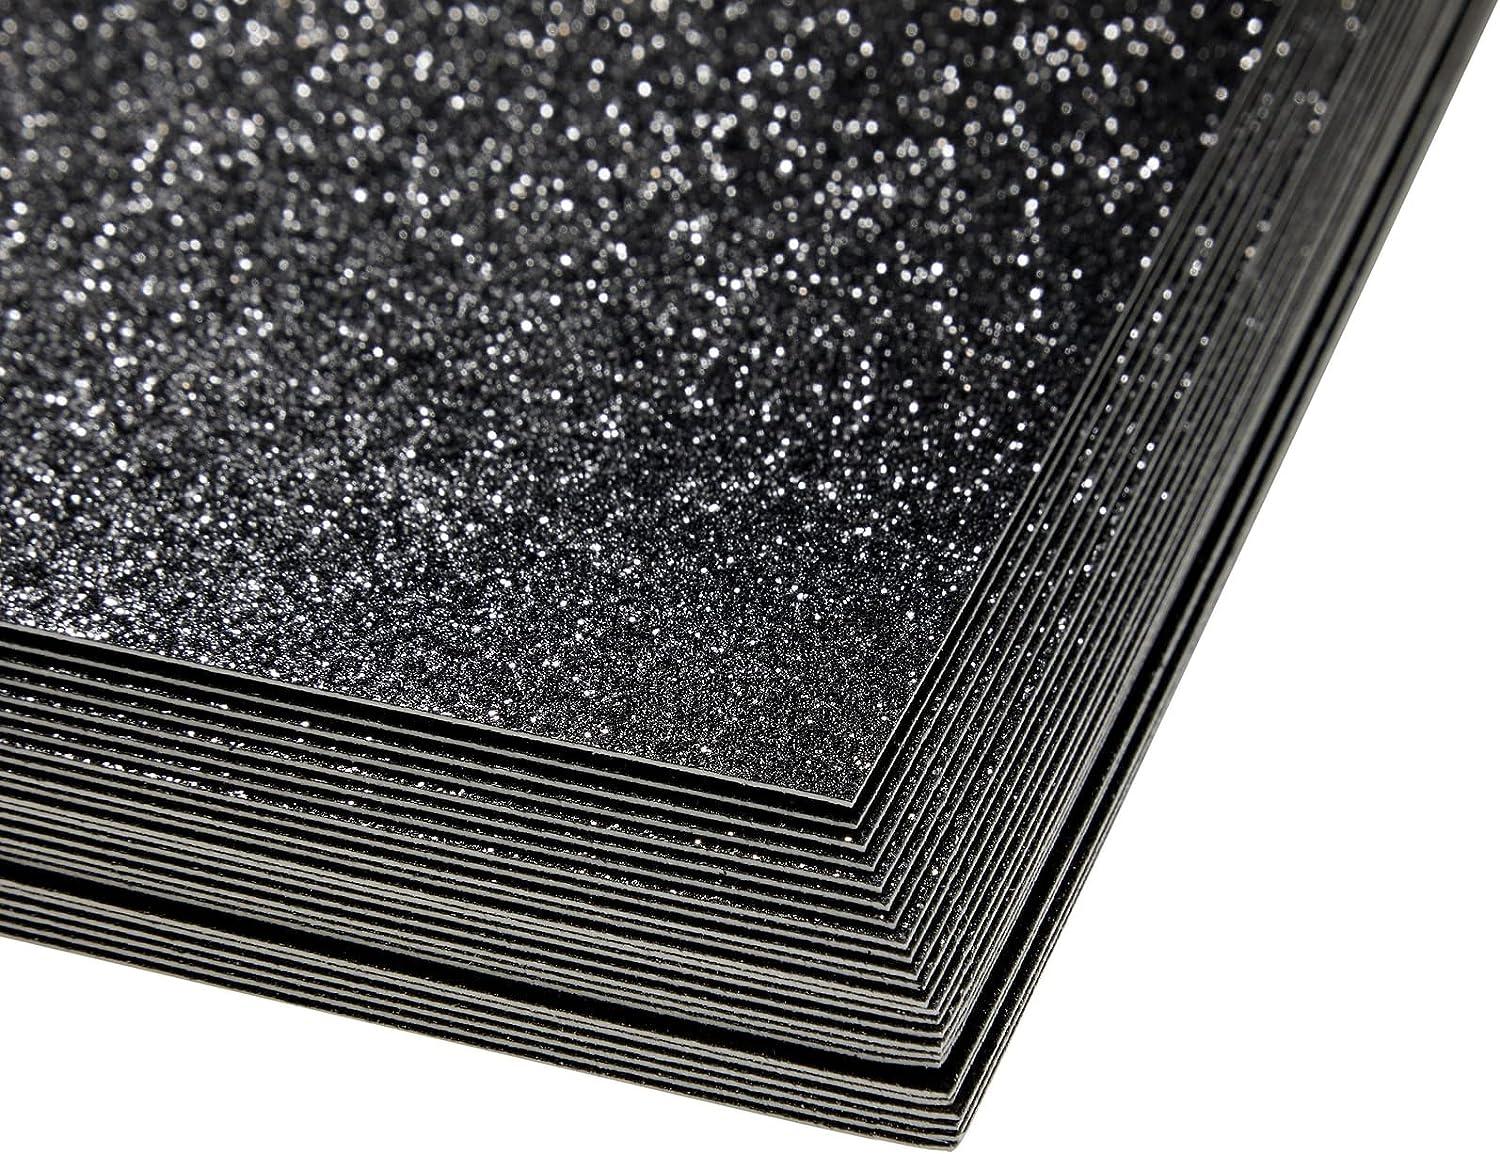 Baisunt 20 Sheets Black Glitter Cardstock Paper for DIY Art Project, Scrapbook, Birthday Wedding Party Decoration 250GSM(8x12 in, Non Adhesive)